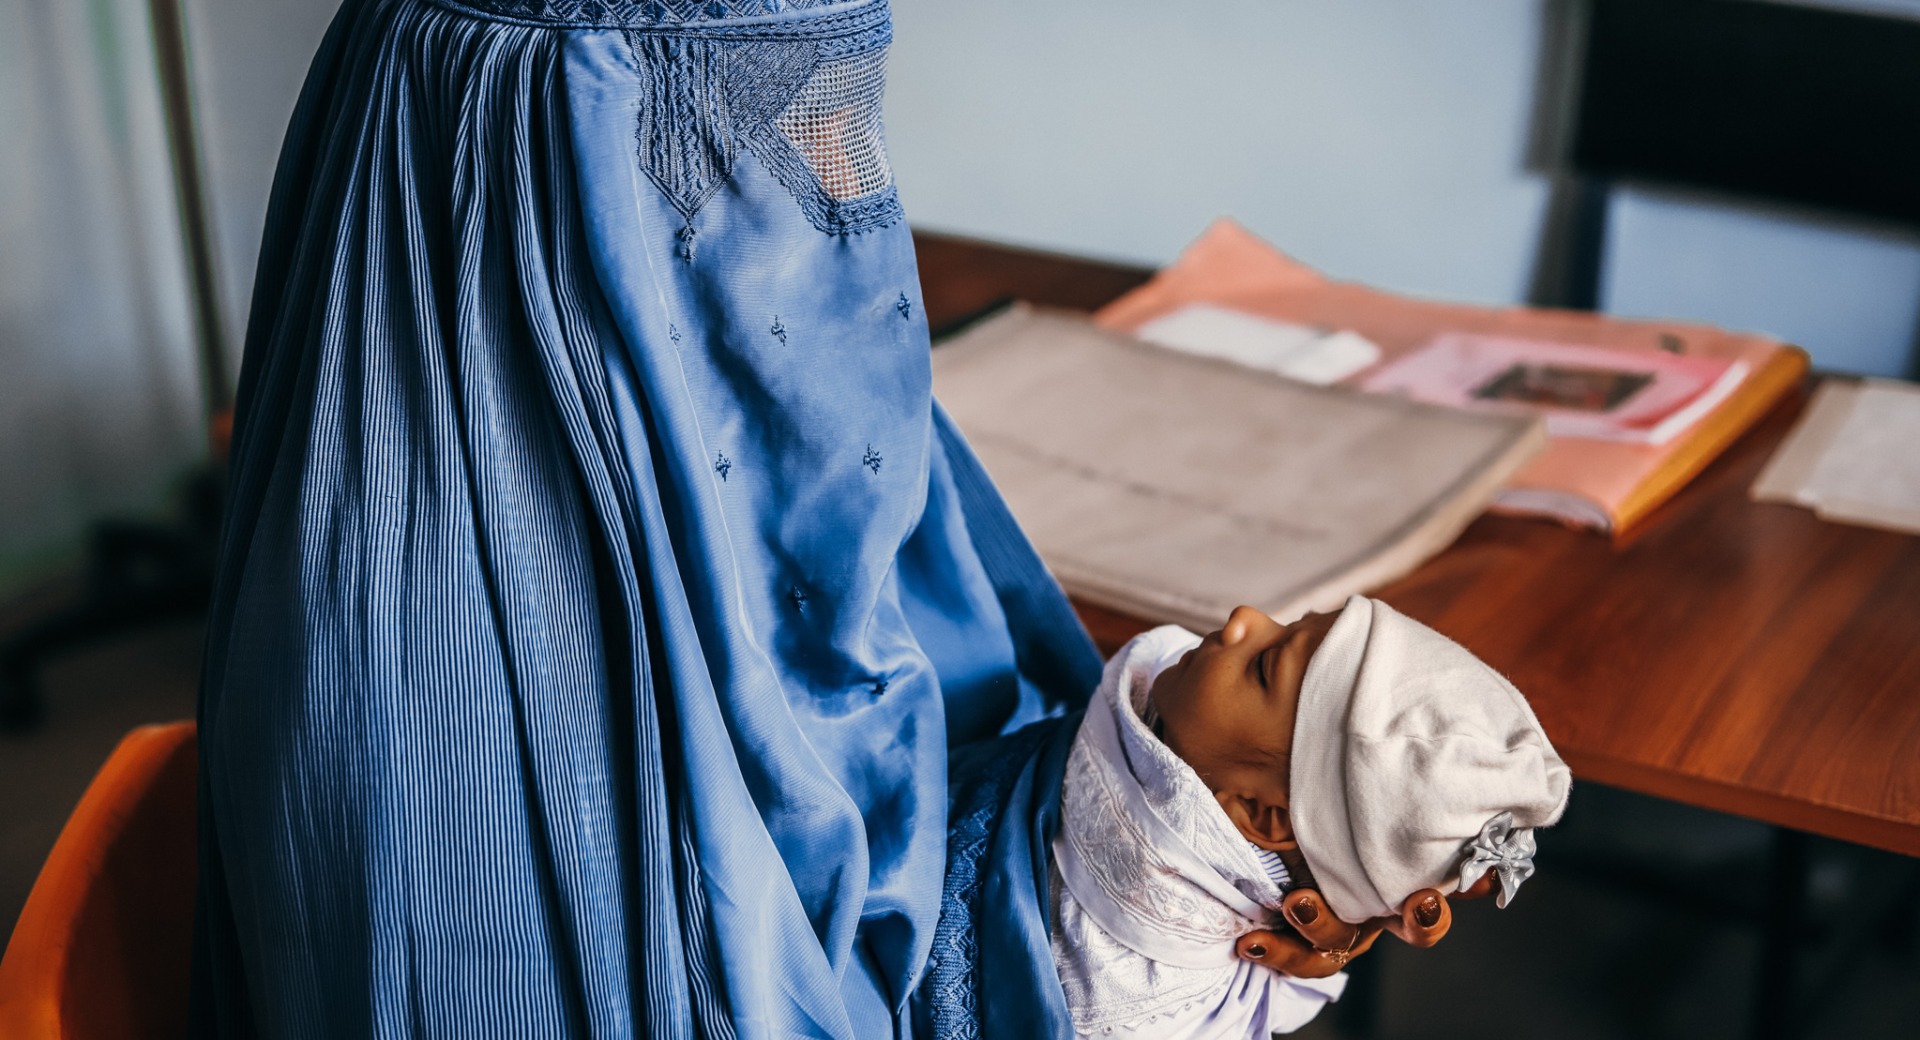 A mother learns about post-natal care during a medical consultation. (Parwan province, October 2020)